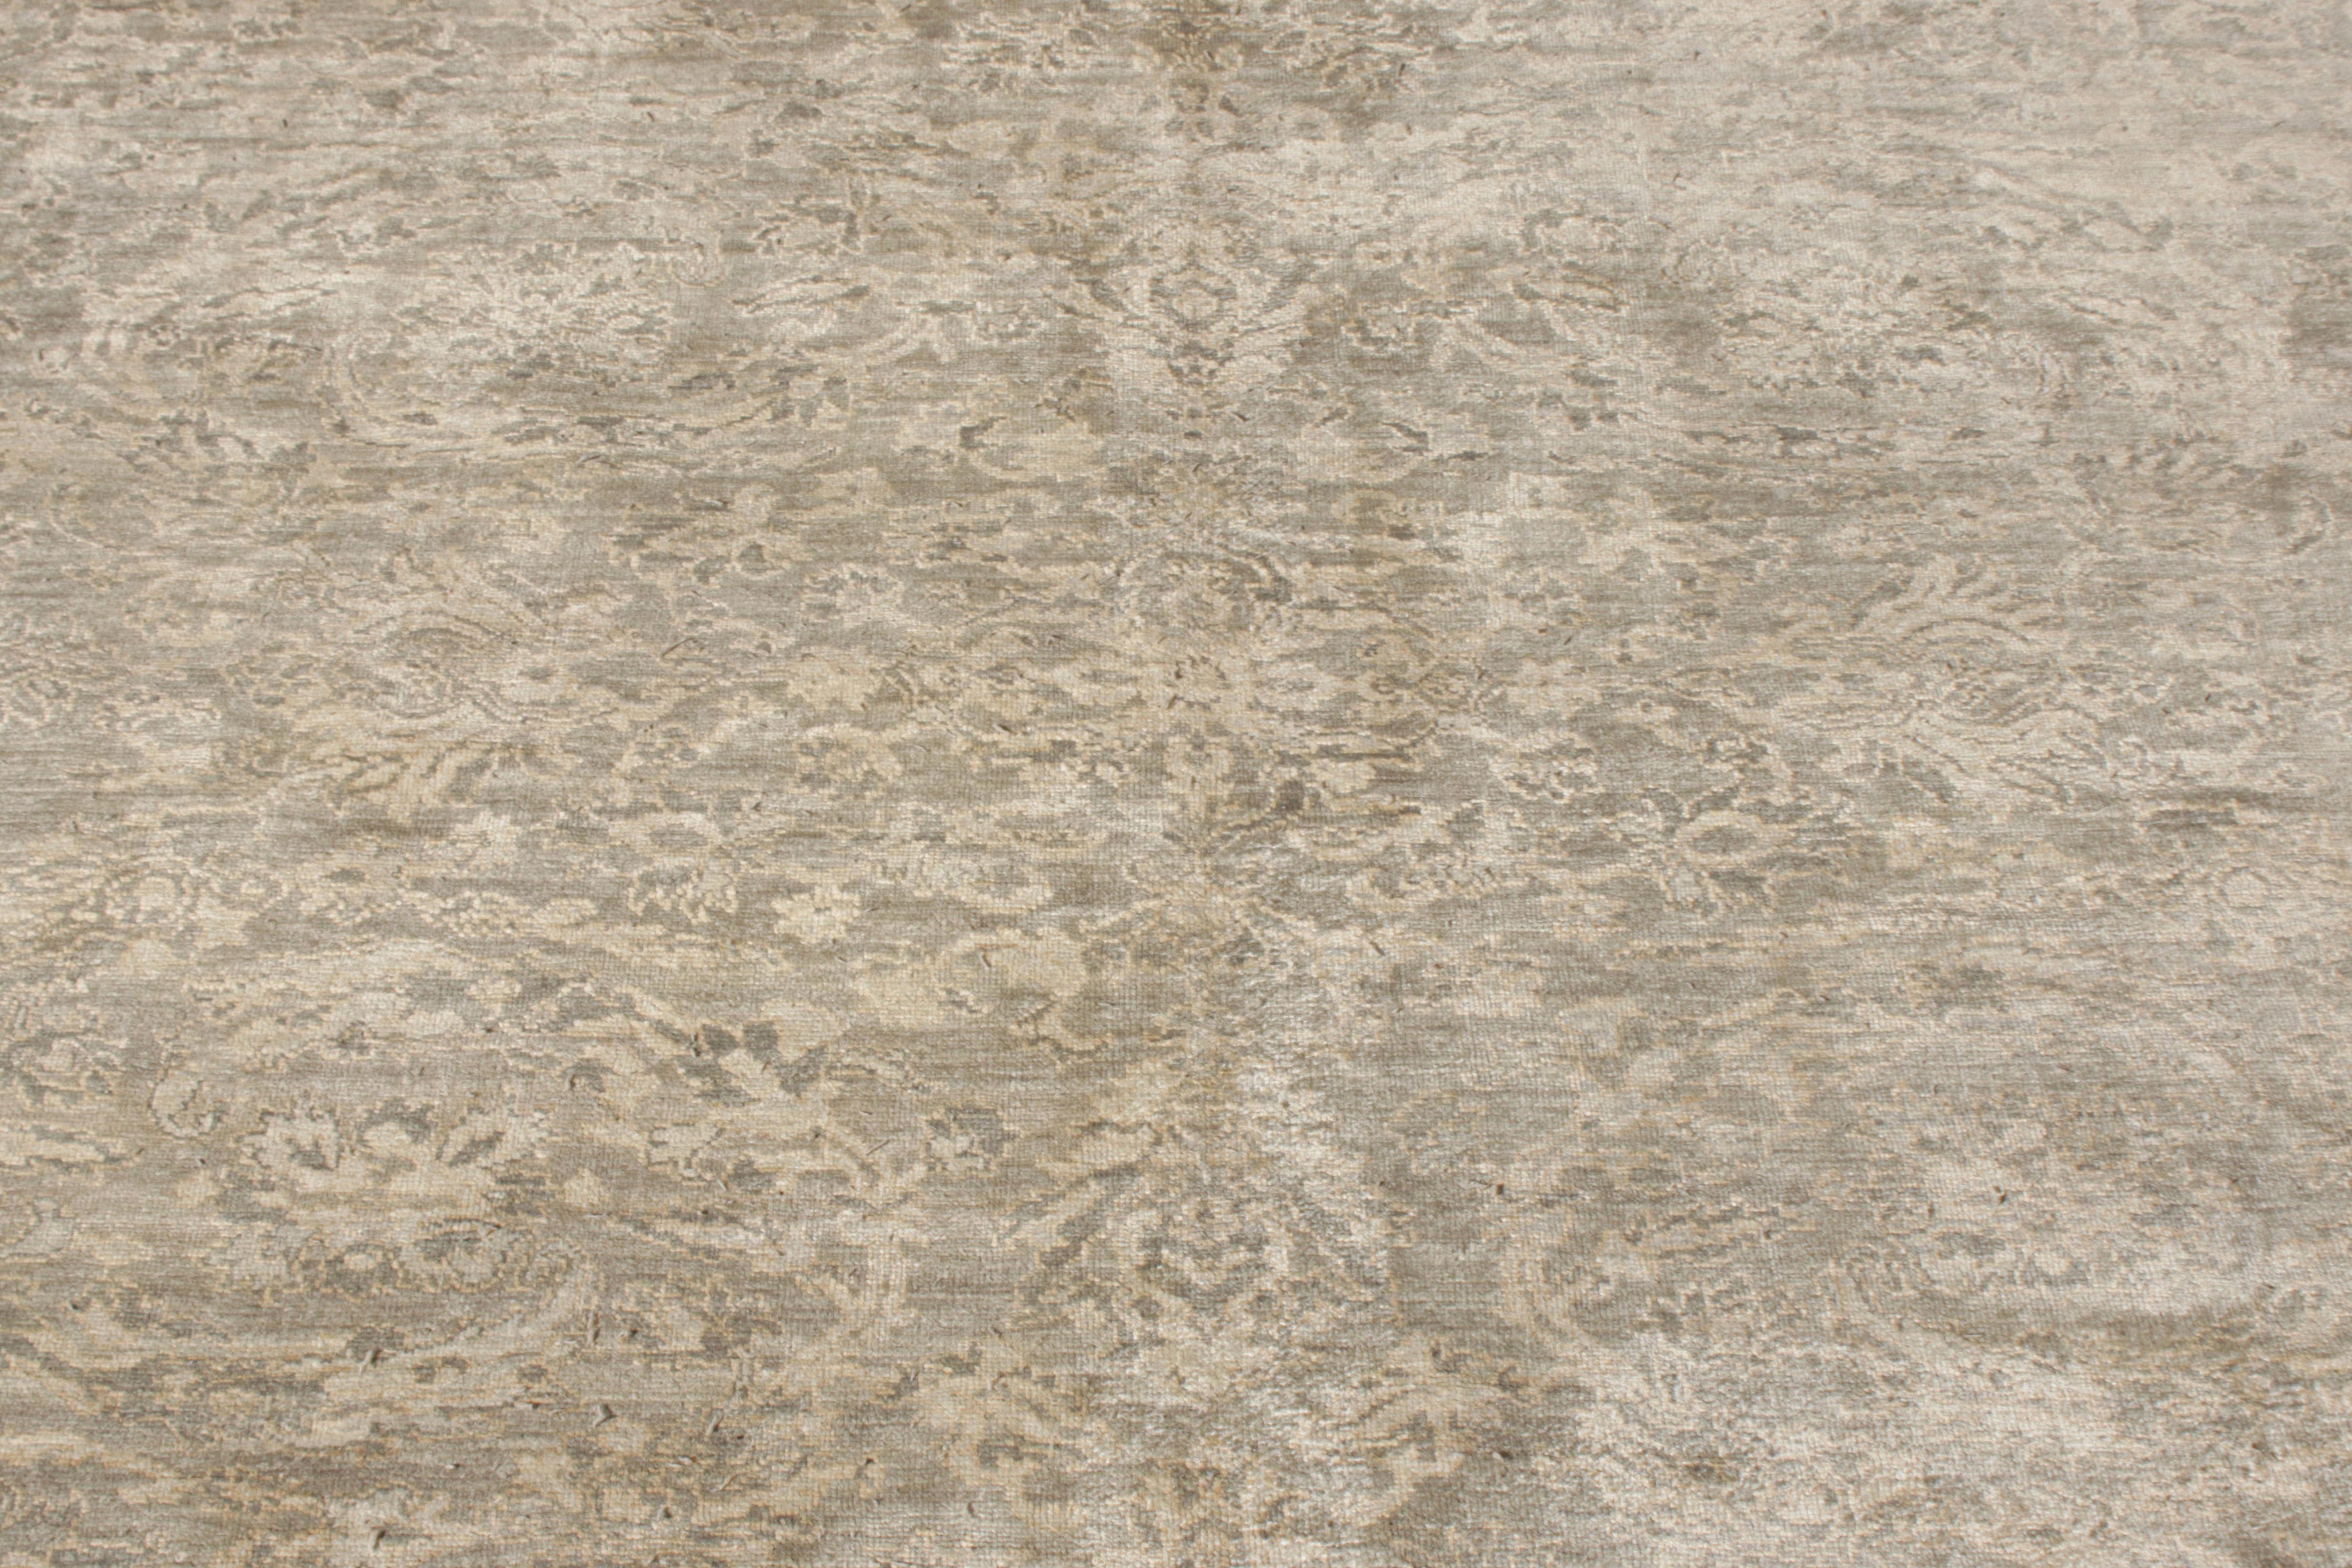 Indian Rug & Kilim’s Transitional Style Rug in an All over Gray, Beige-Brown Floral For Sale